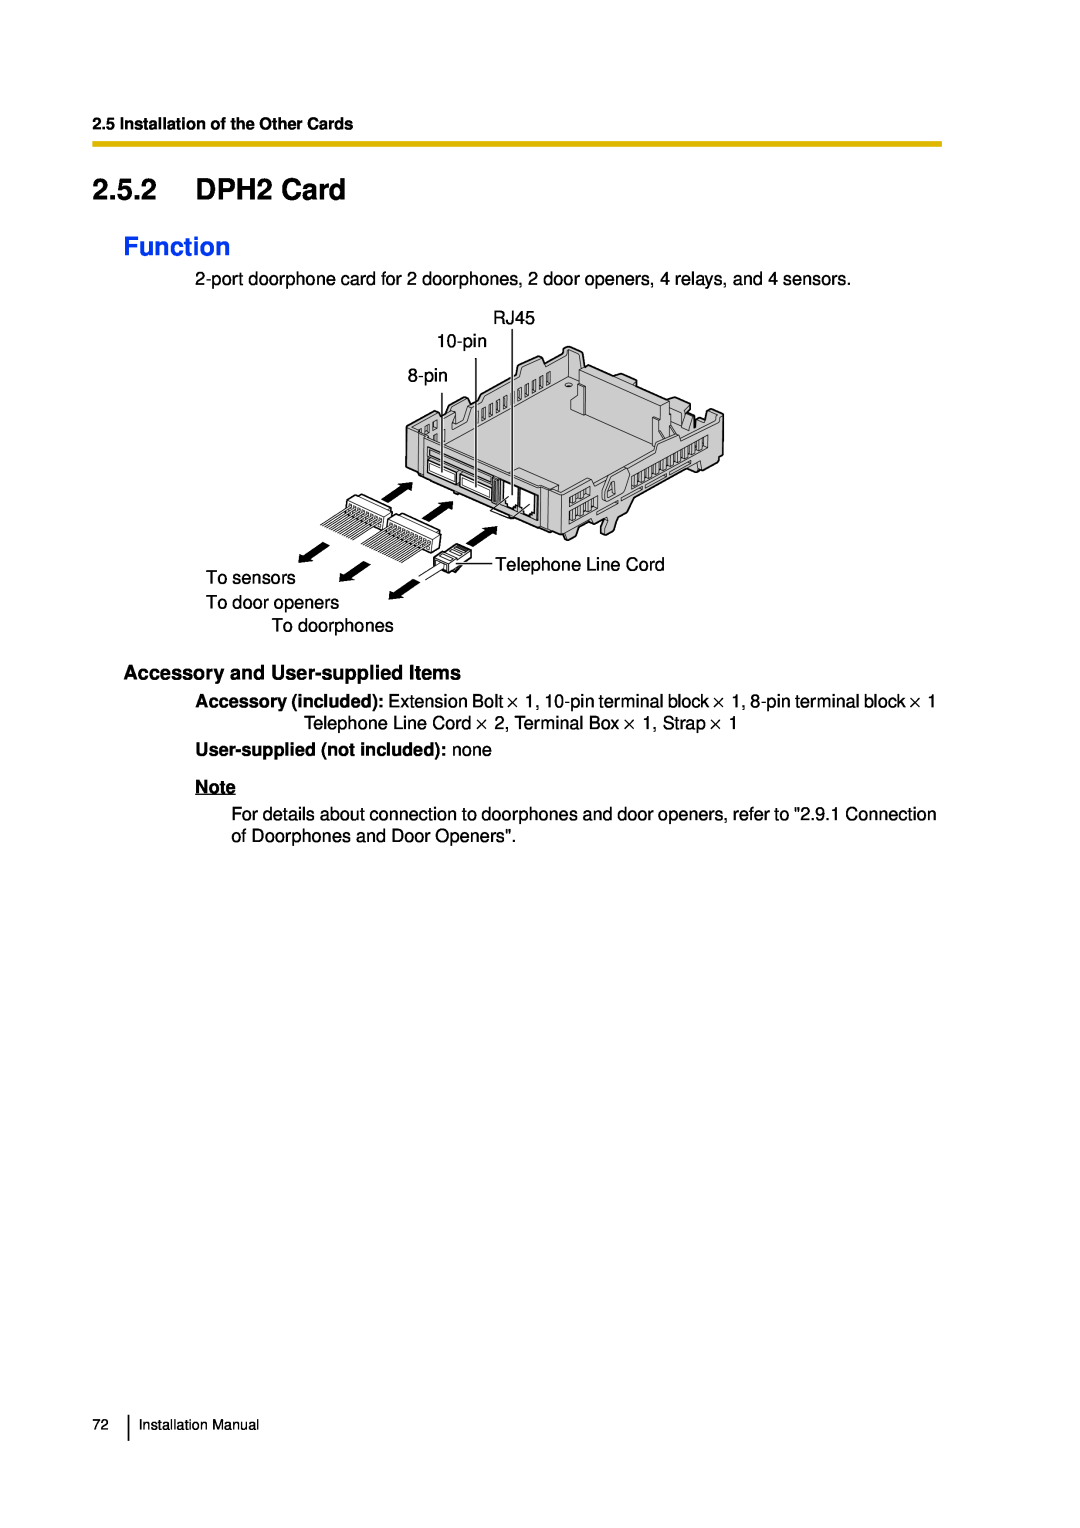 Panasonic KX-TDA30 installation manual 2.5.2DPH2 Card, Function, User-suppliednot included: none 